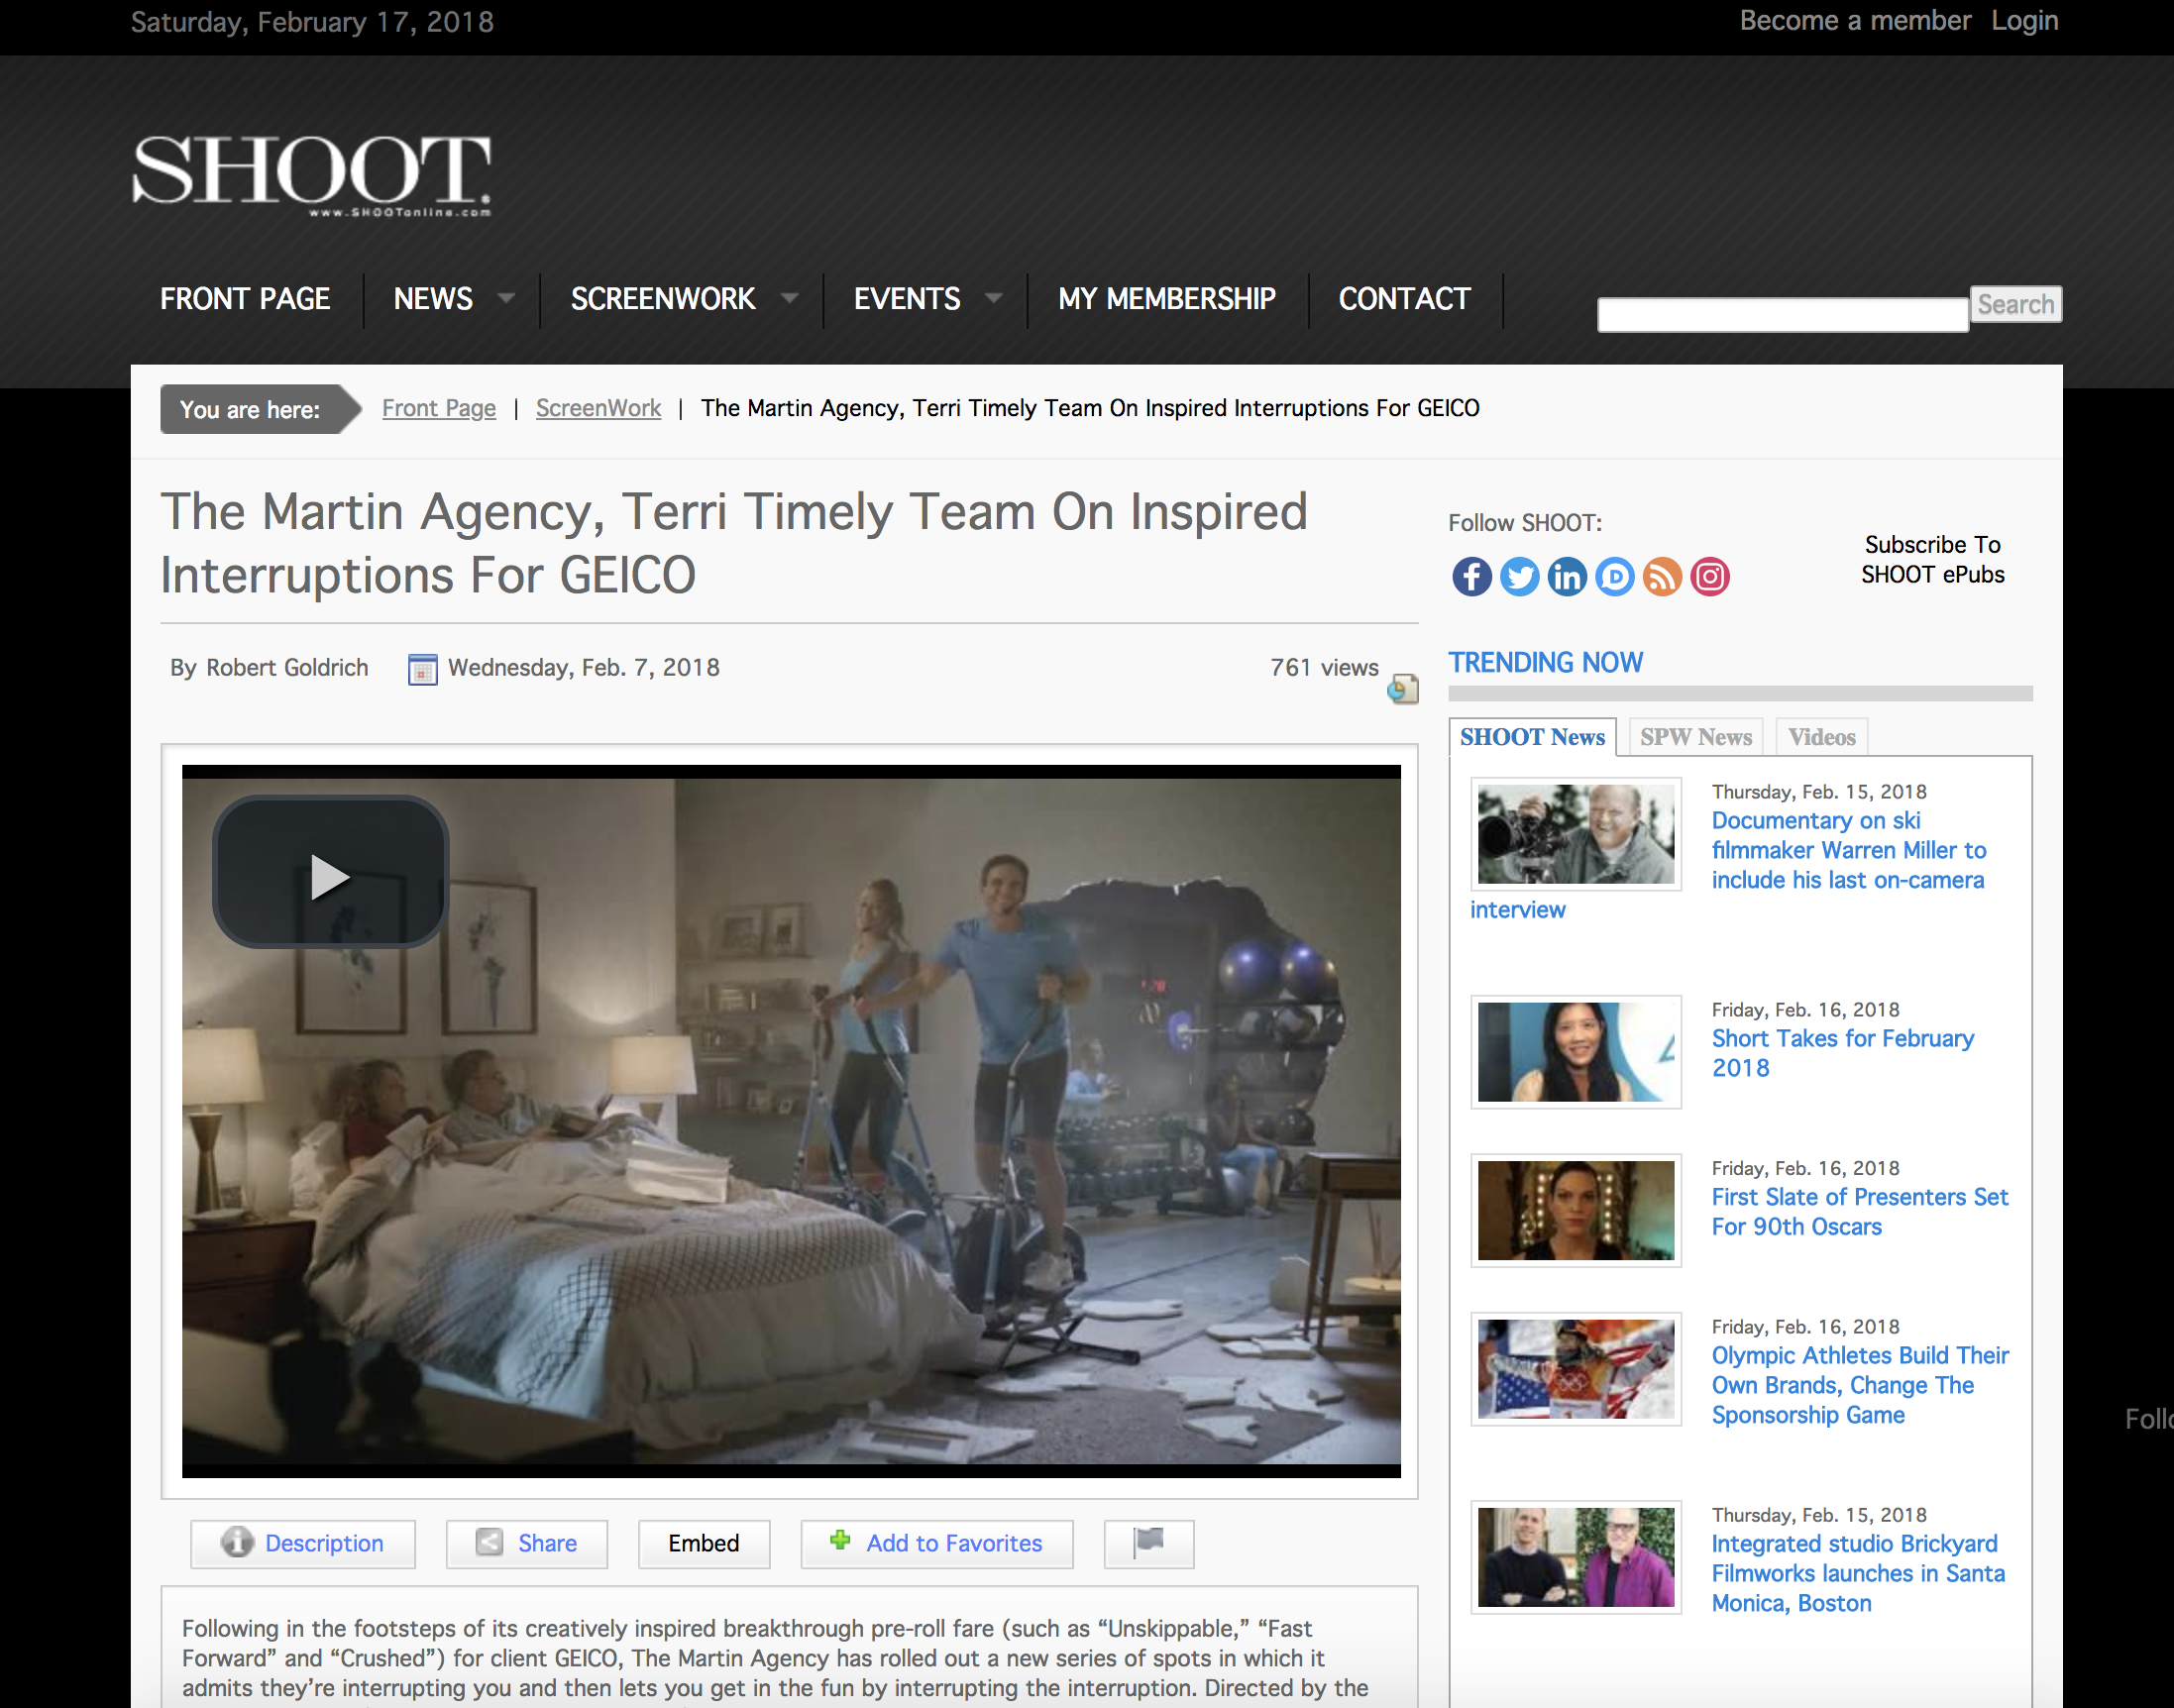 The Martin Agency, Terri Timely on Inspired Interruptions for GEICO